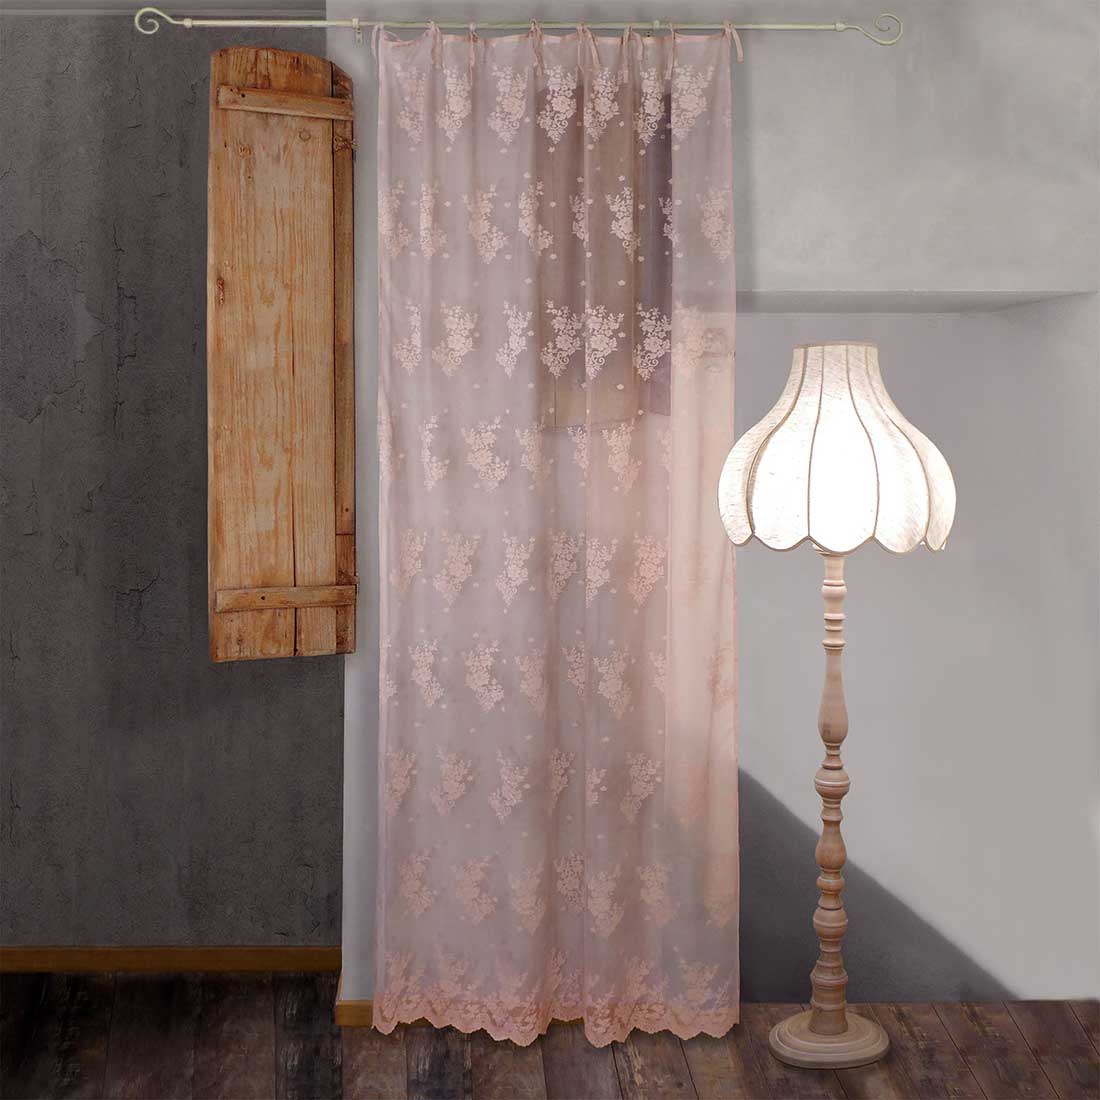 Shabby Chic Polyester-Spitzenvorhang 140 x 290 Poly-Sunset Collection Farbe Mauve